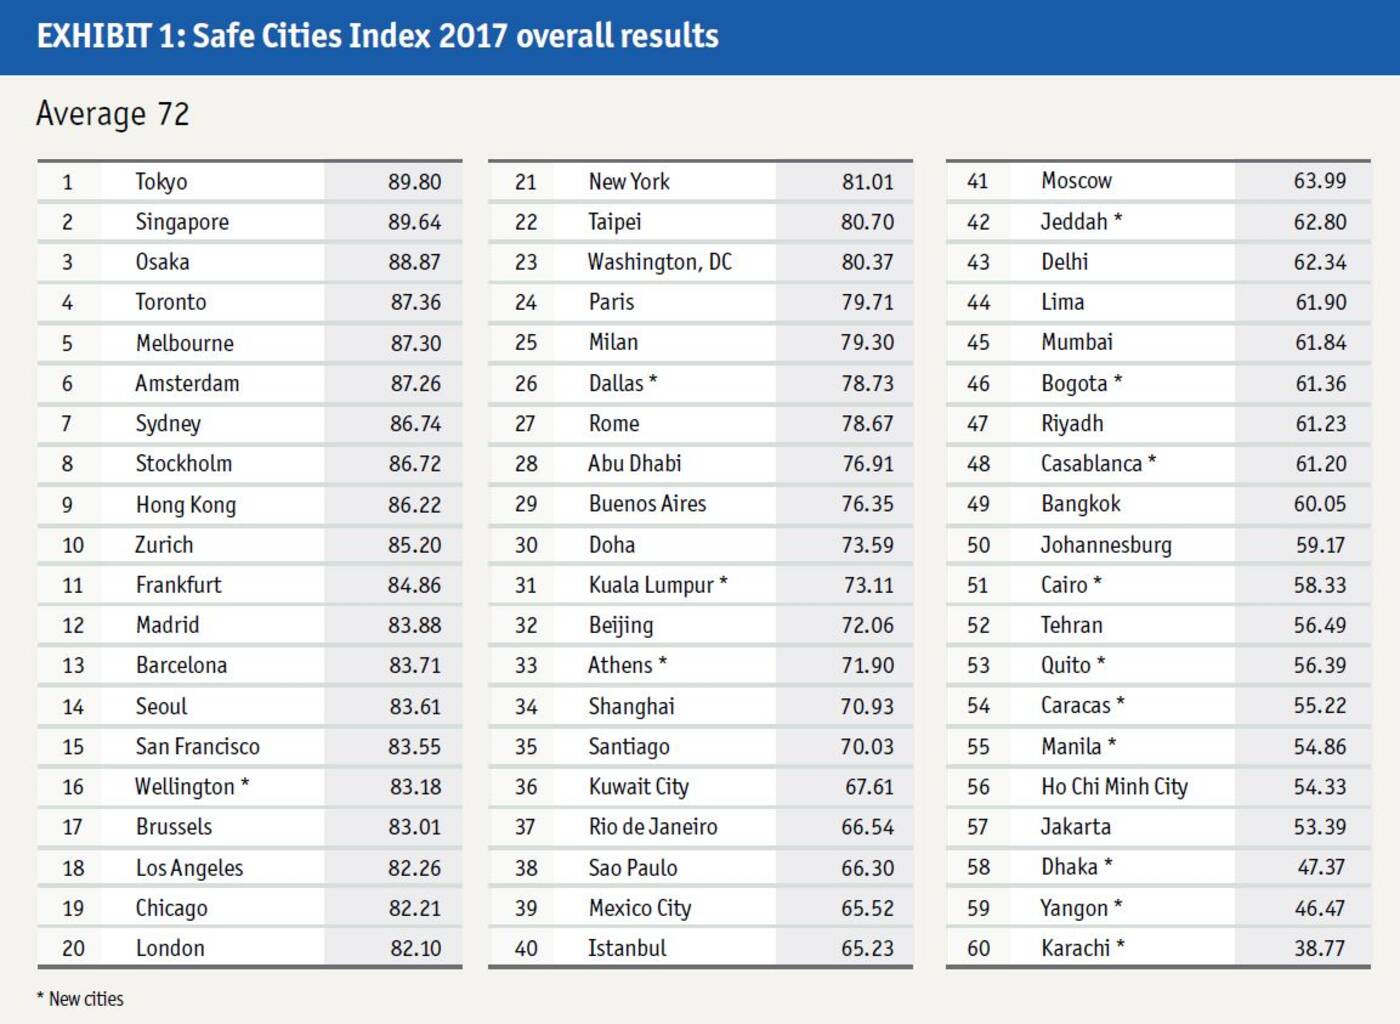 20171012 Safe Cities Index 2017.JPG?cmd=resize&quality=70&w=1400&height=2500